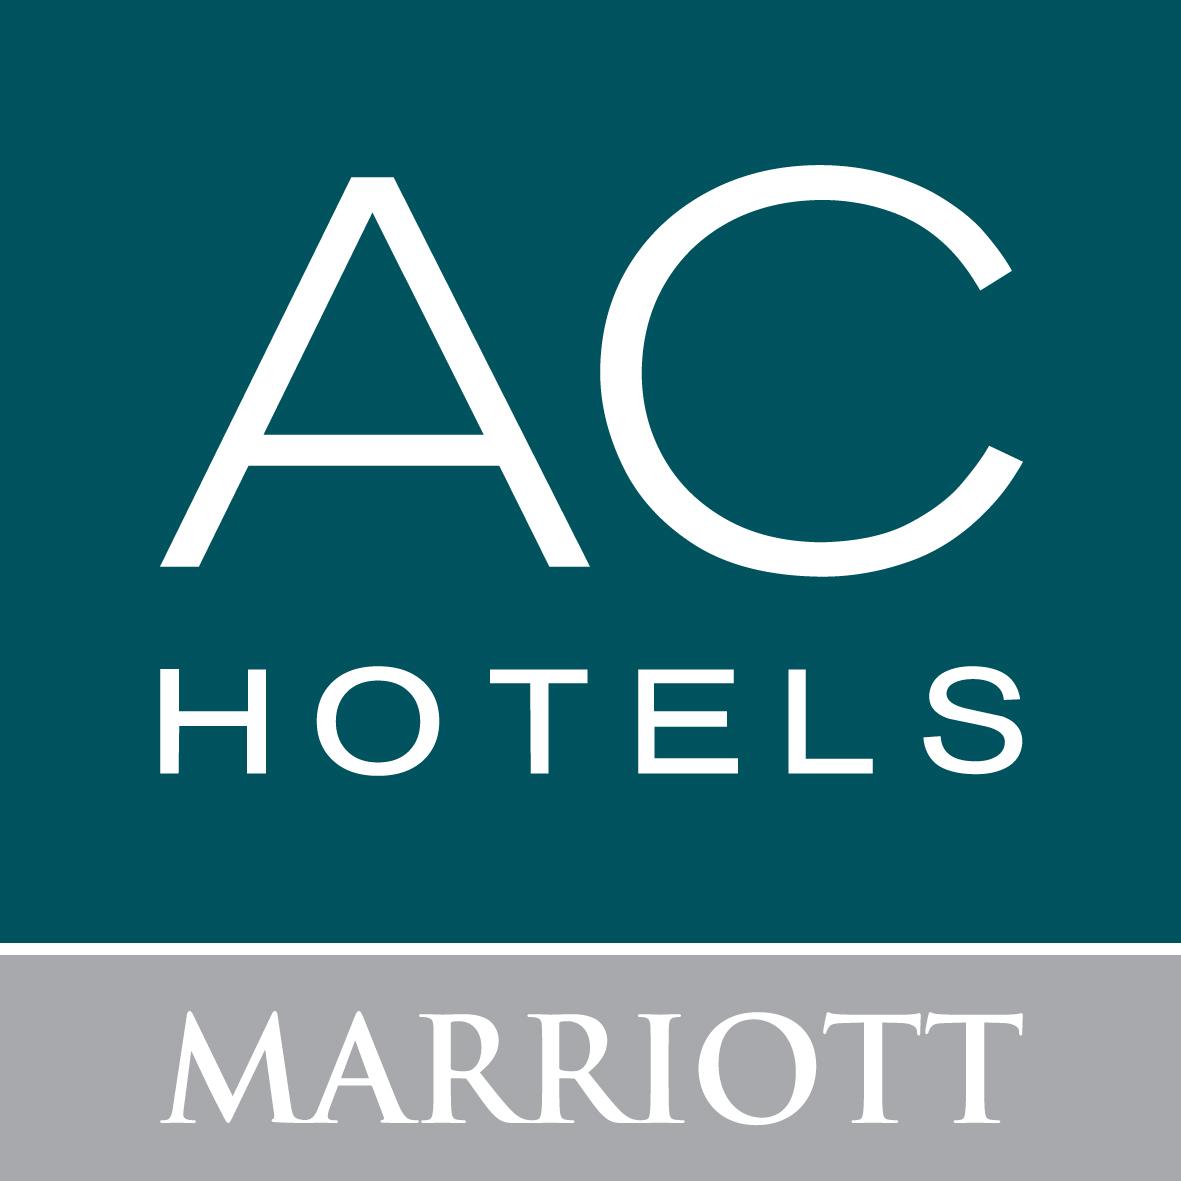 AC Hotels by Marriott